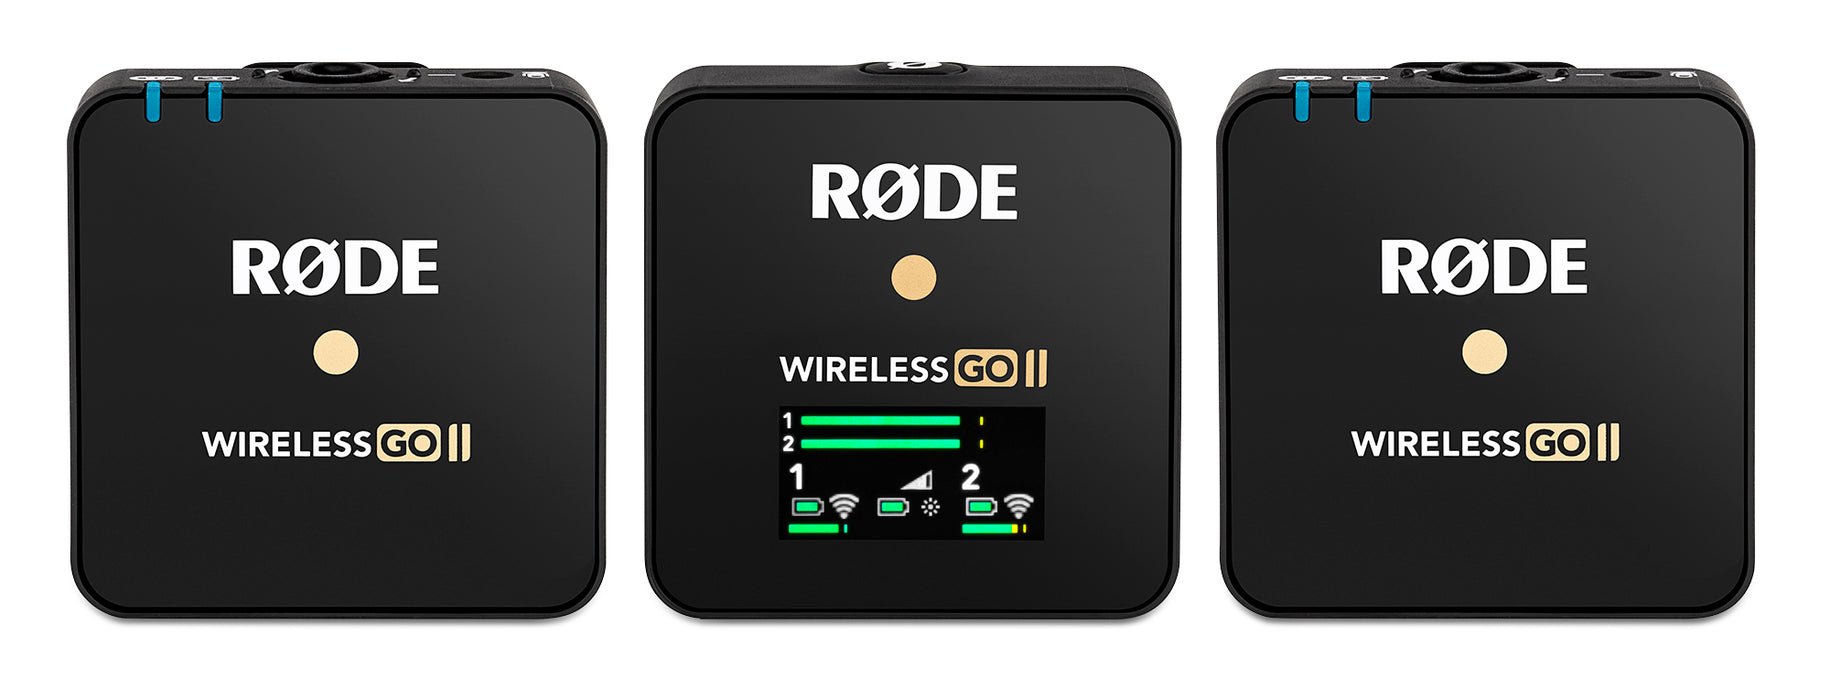 Rode's new Wireless GO II adds dual mic support, improved range